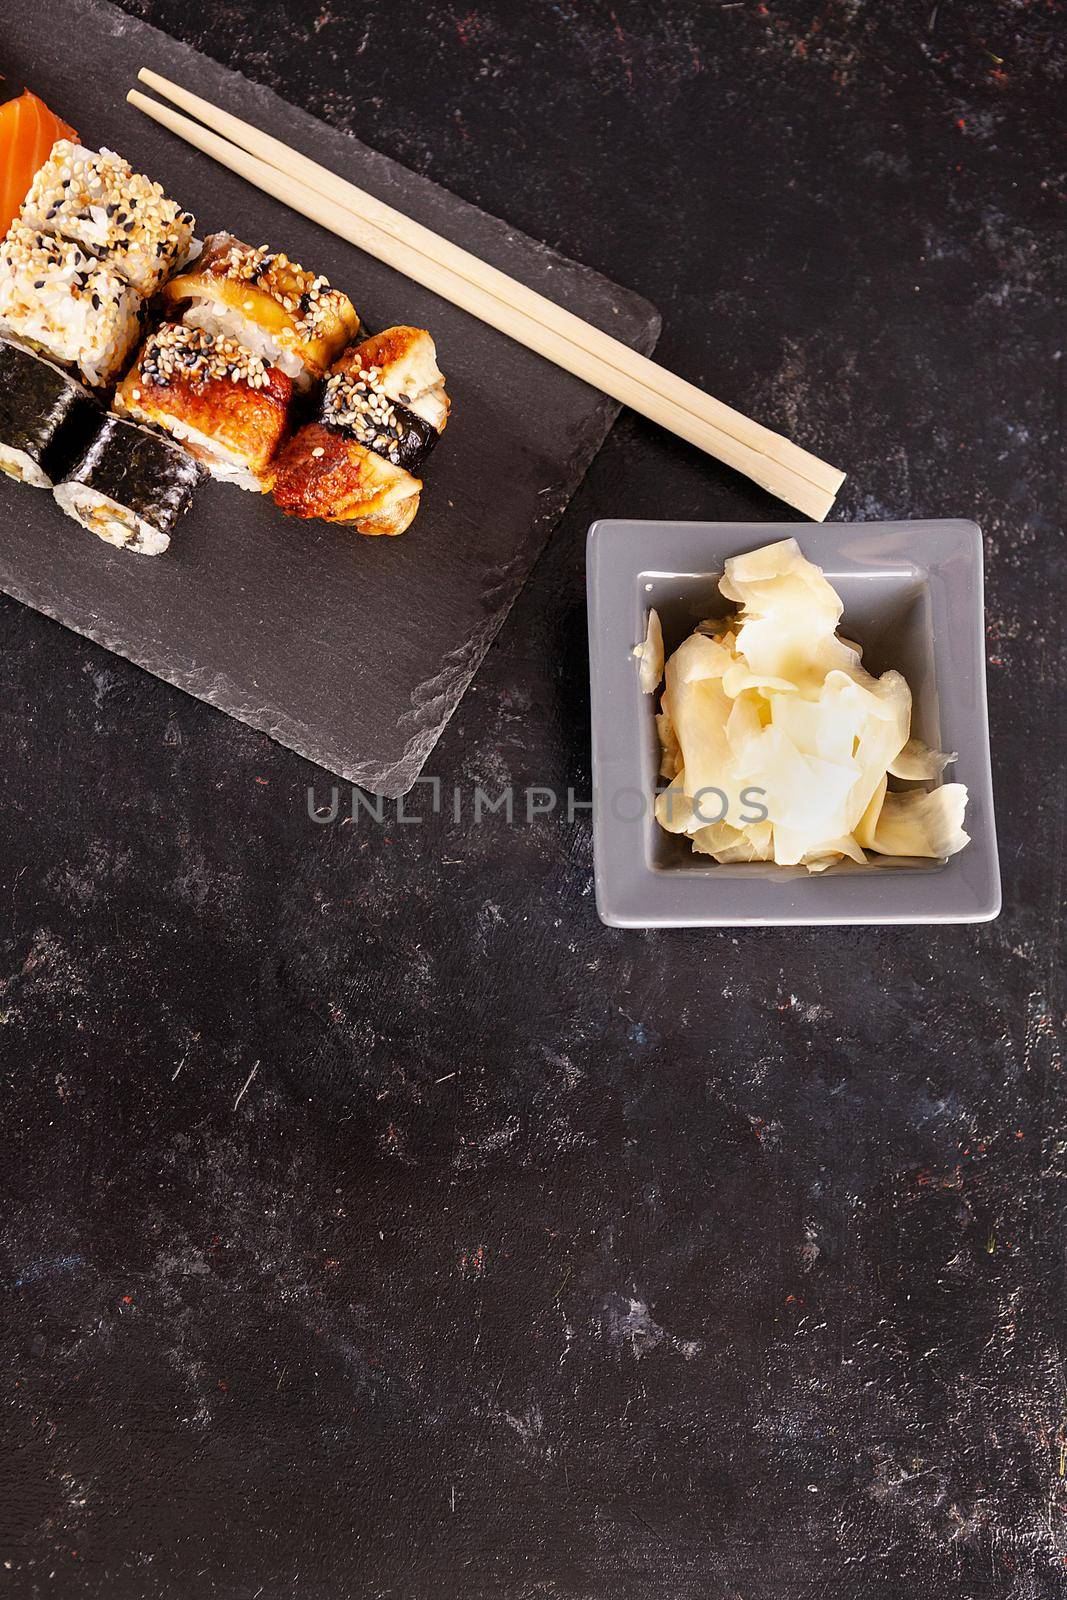 Sushi plate on dark stone next to ginger on black background with copyspace available